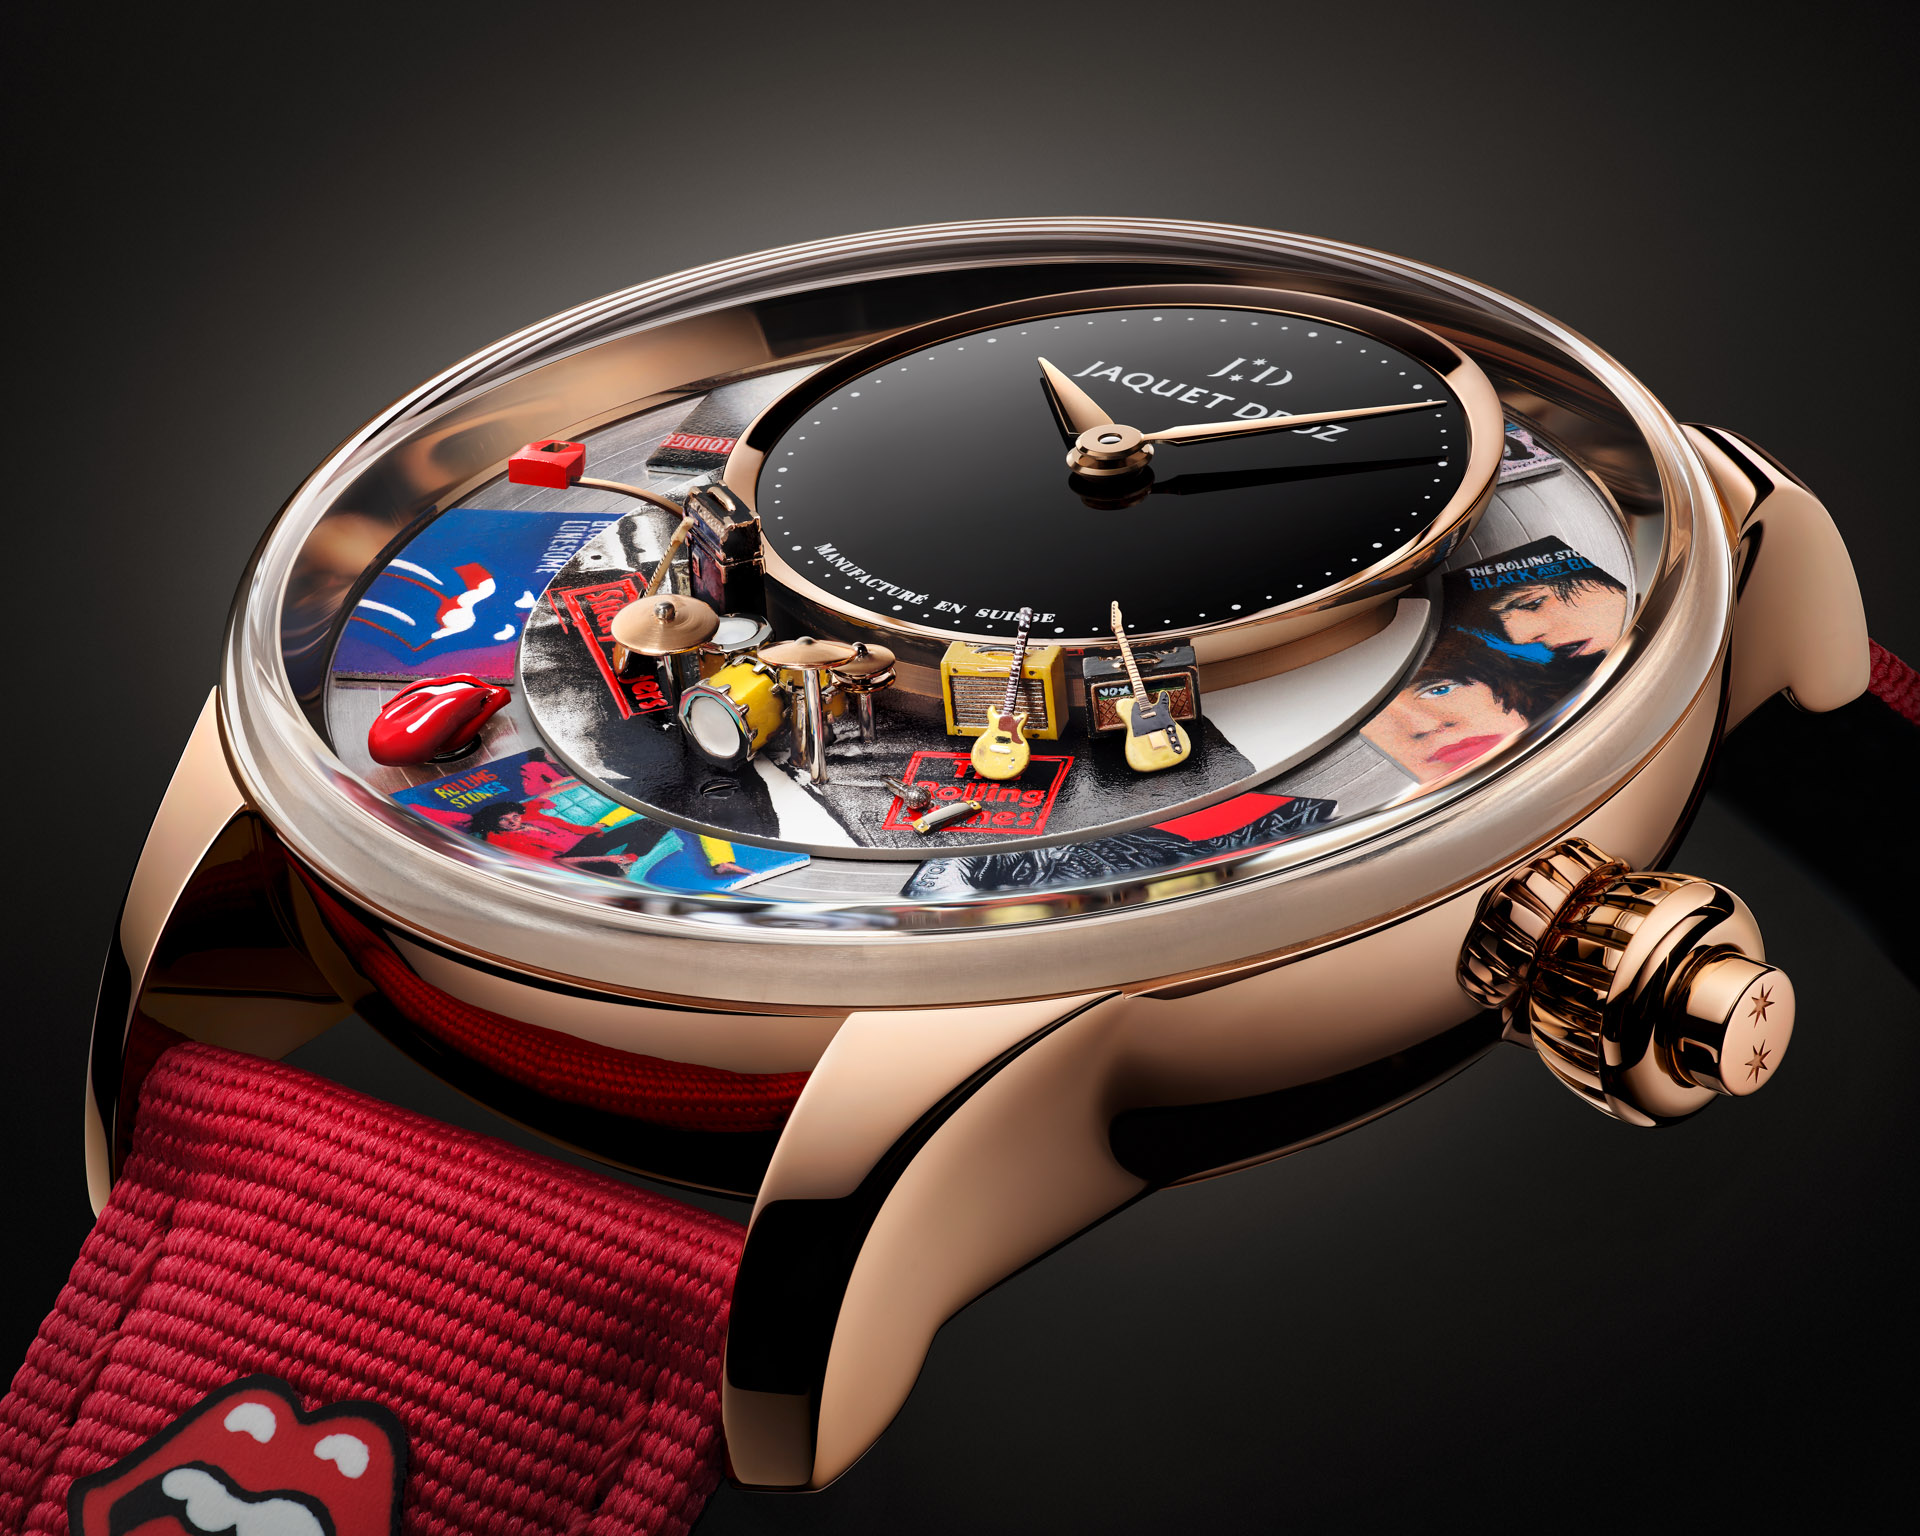 So Much More Than Rock ‘n’ Roll: Jaquet Droz’s Unique Homage to The Rolling Stones